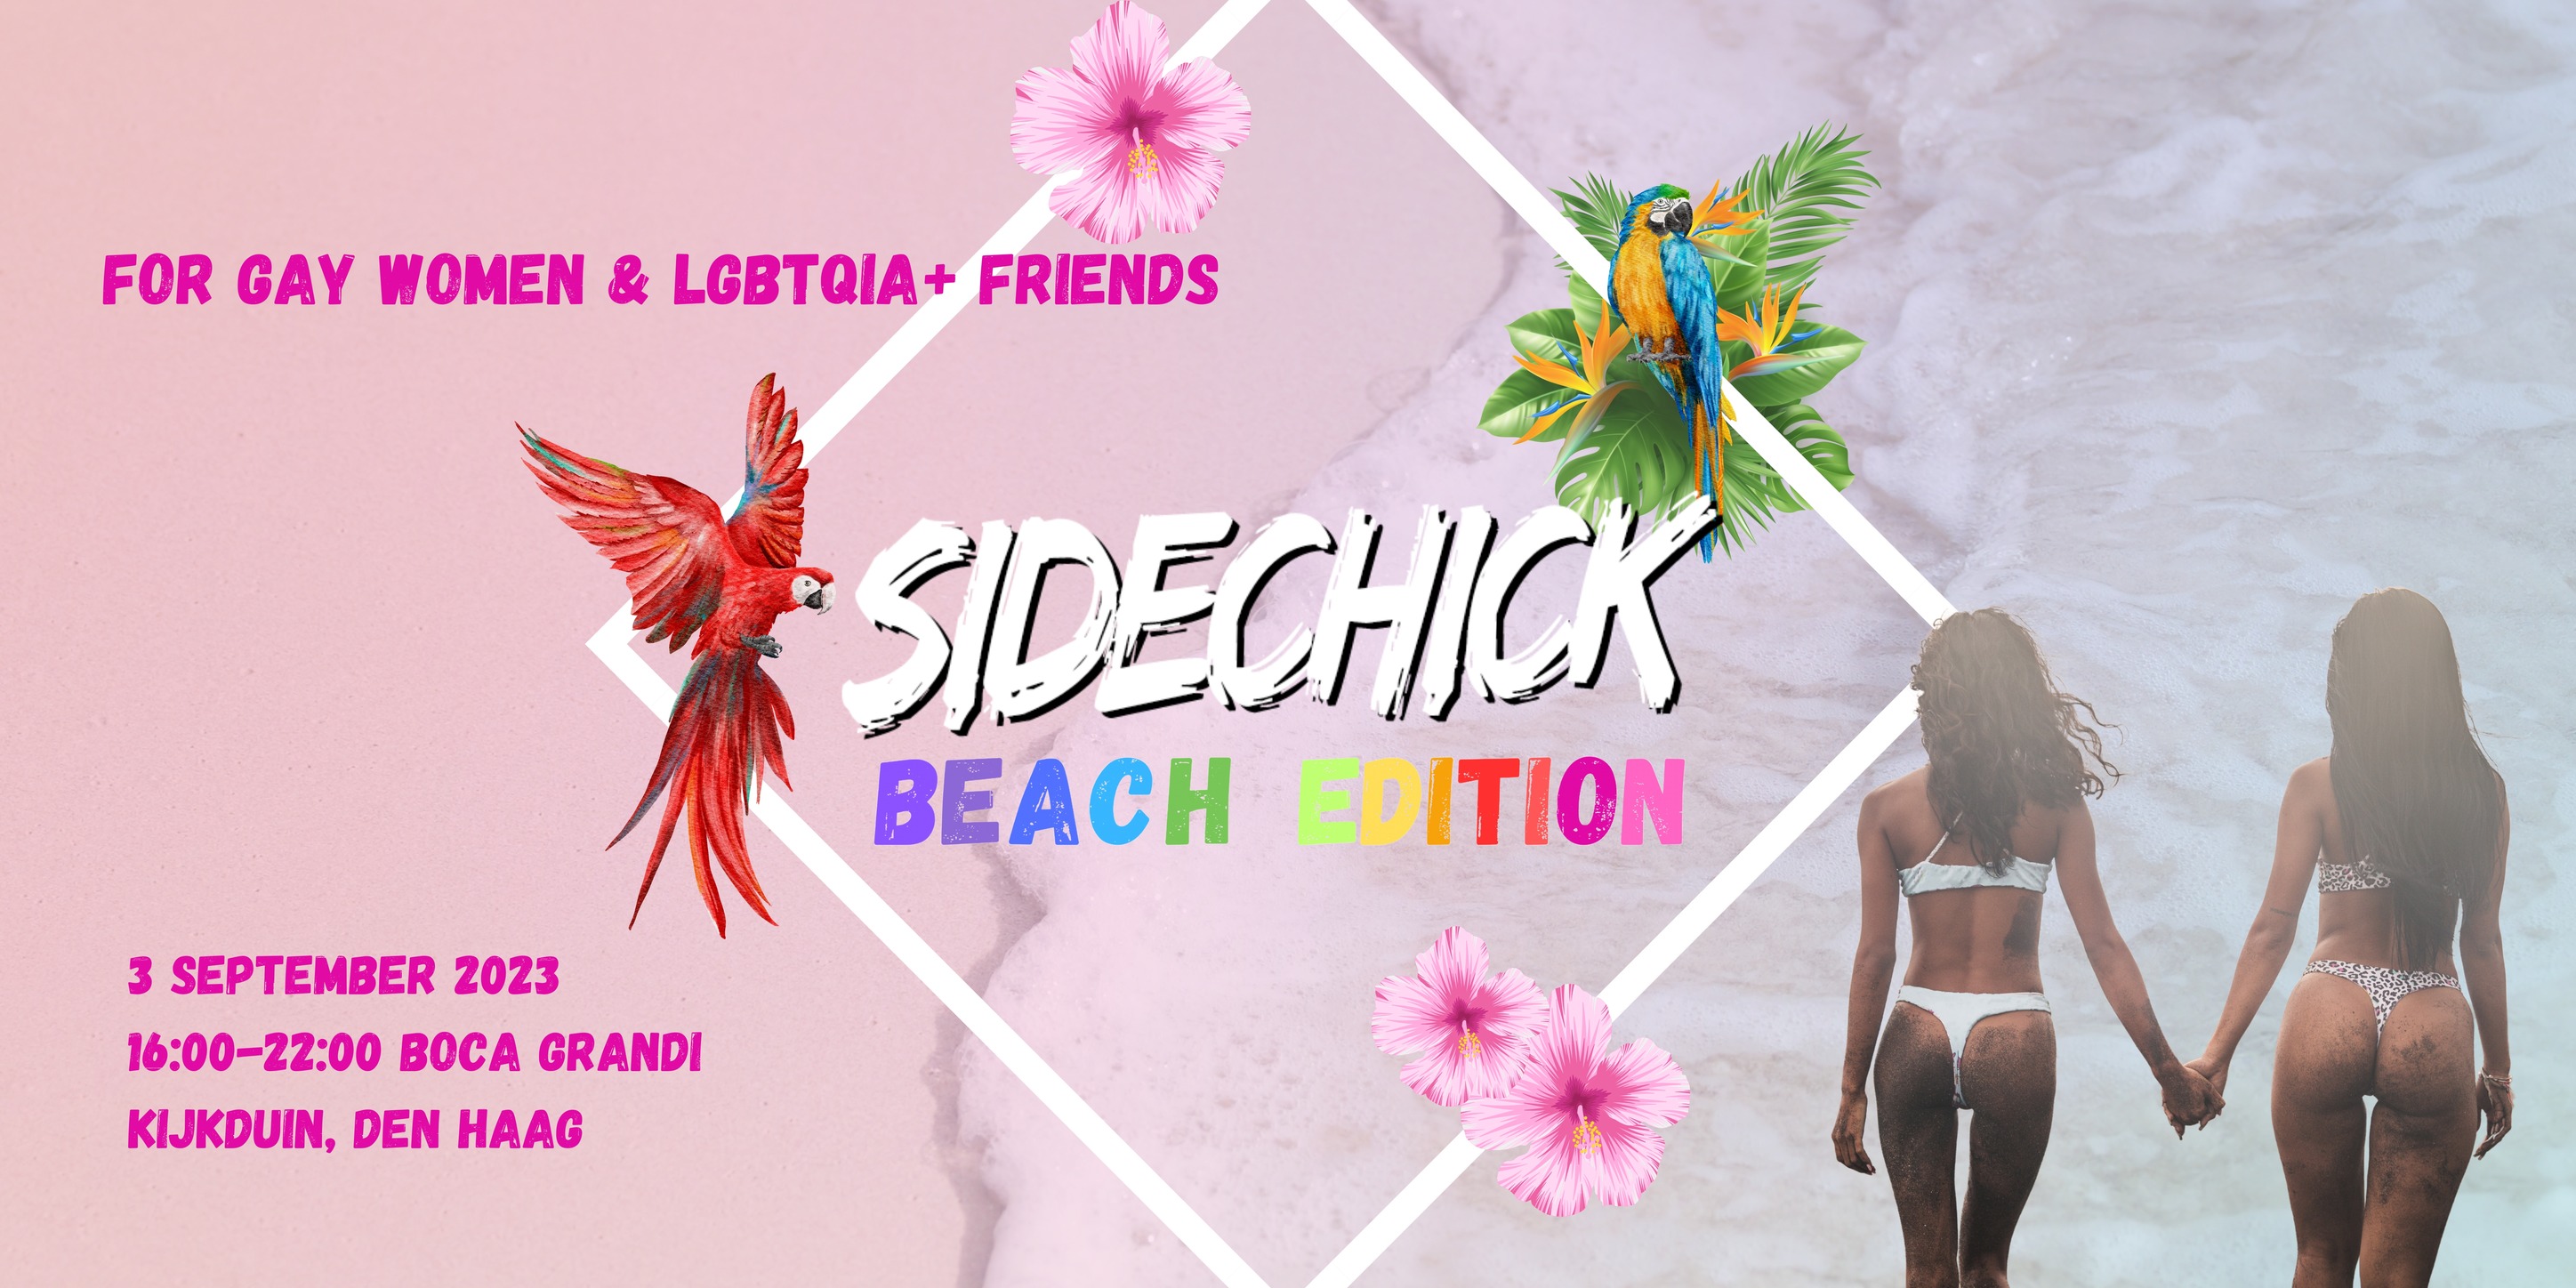 Colourful illustration for the SideChick Queer Beach Party. Text says: SideChick Beach Edition, for gay women and lgbtqia+ friends, 3 september 2023, 16.00-22.00 Boca Grandi, Kijkduin, Den Haag. There are parrots in the image, one red and one blue-yellow. In the right corner there are two skinny ladylike persons with long brown hiar in a bikini. You see them on their backs. They are walking hand in hand. The whole background has some seashore and water landing on the beach in it in soft tone.